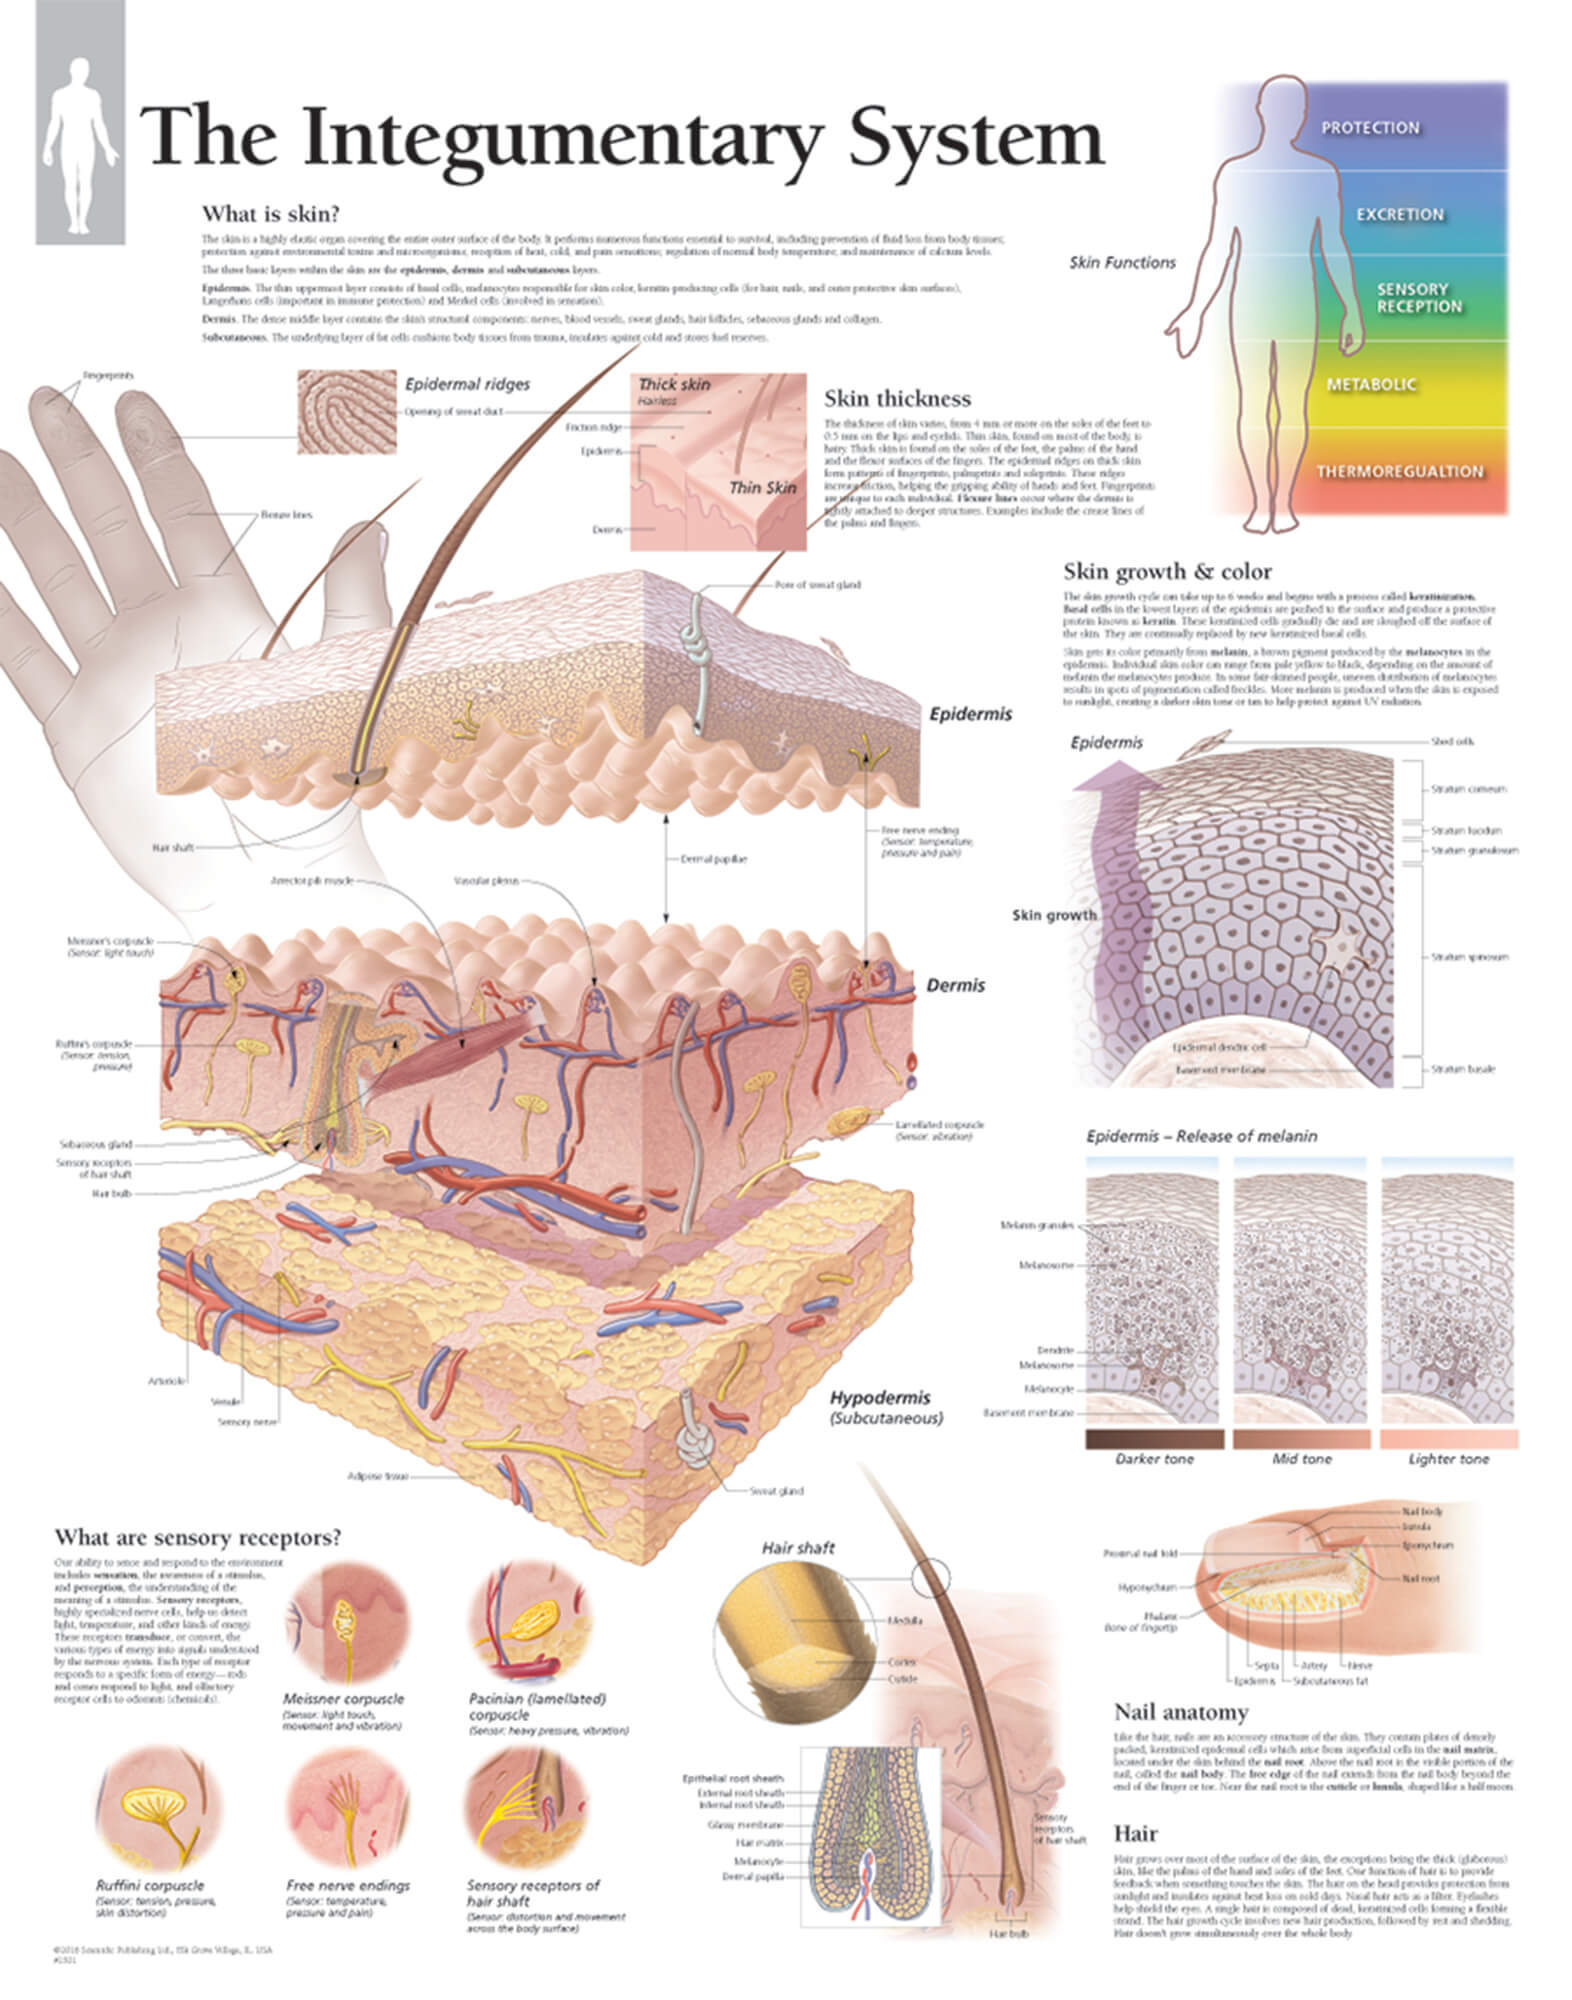 The Integumentary System | Scientific Publishing